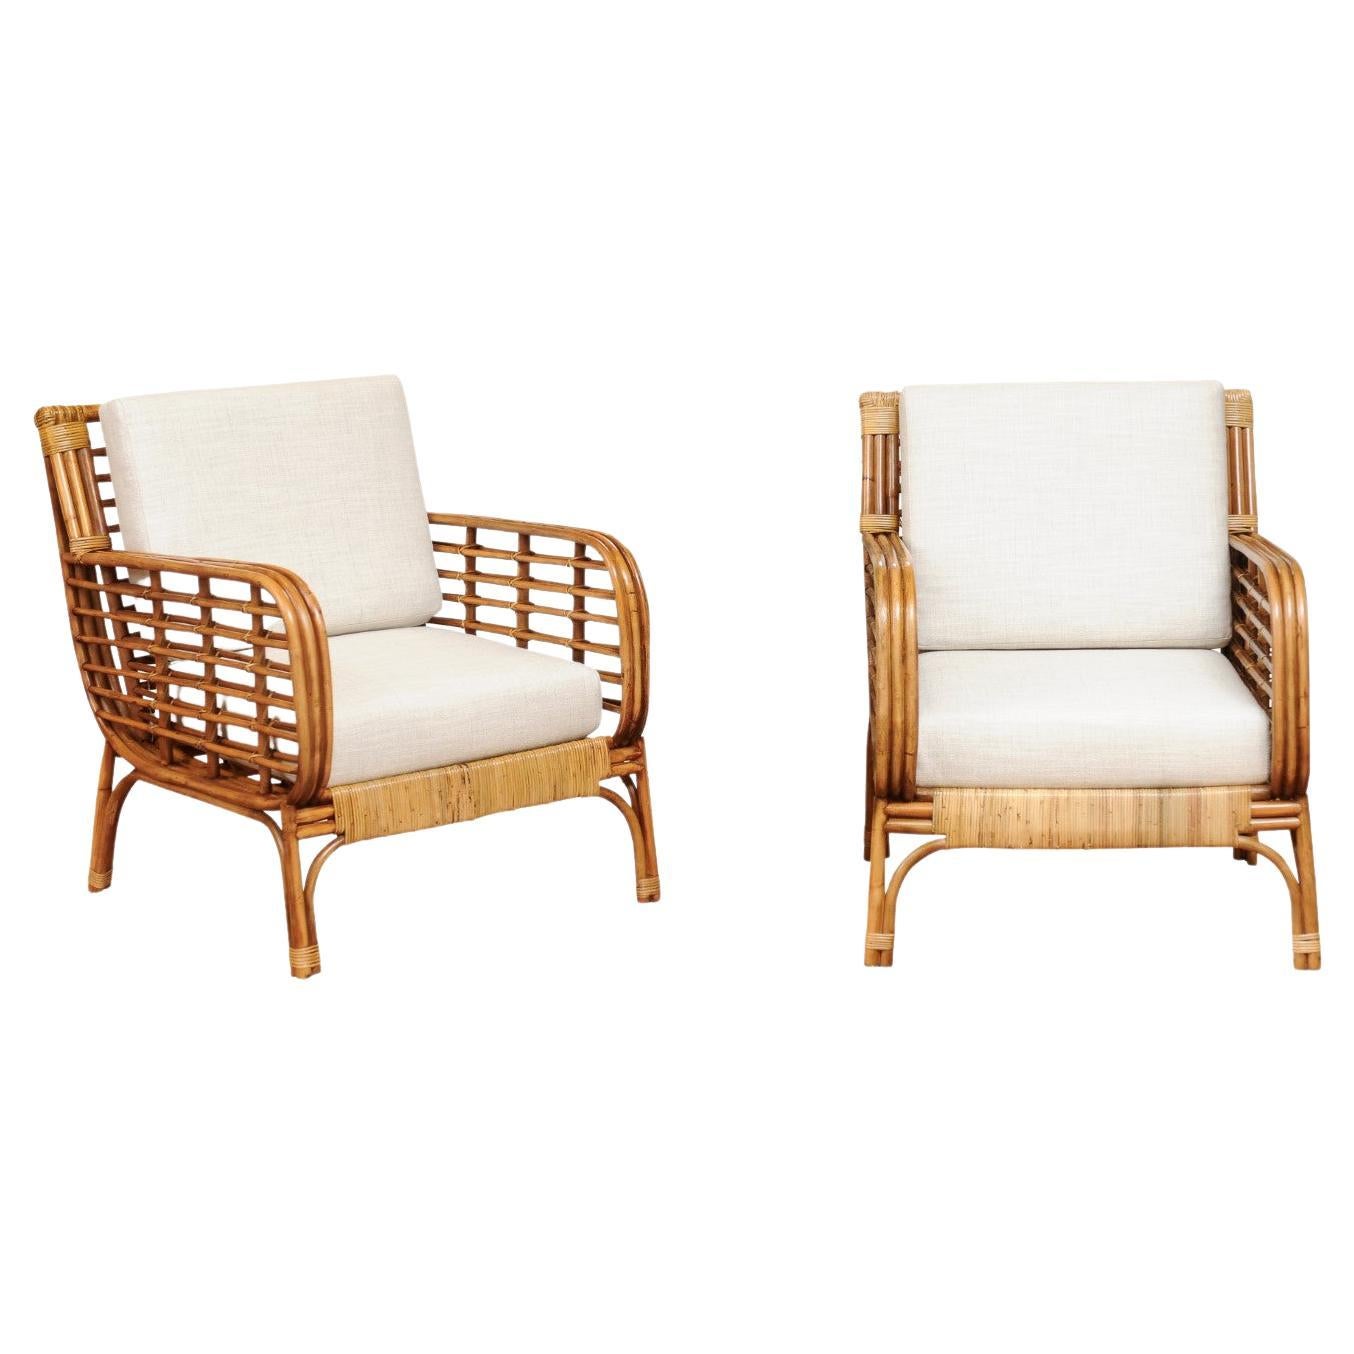 Fabulous Restored Pair of Birdcage Style Rattan and Cane Loungers, circa 1955